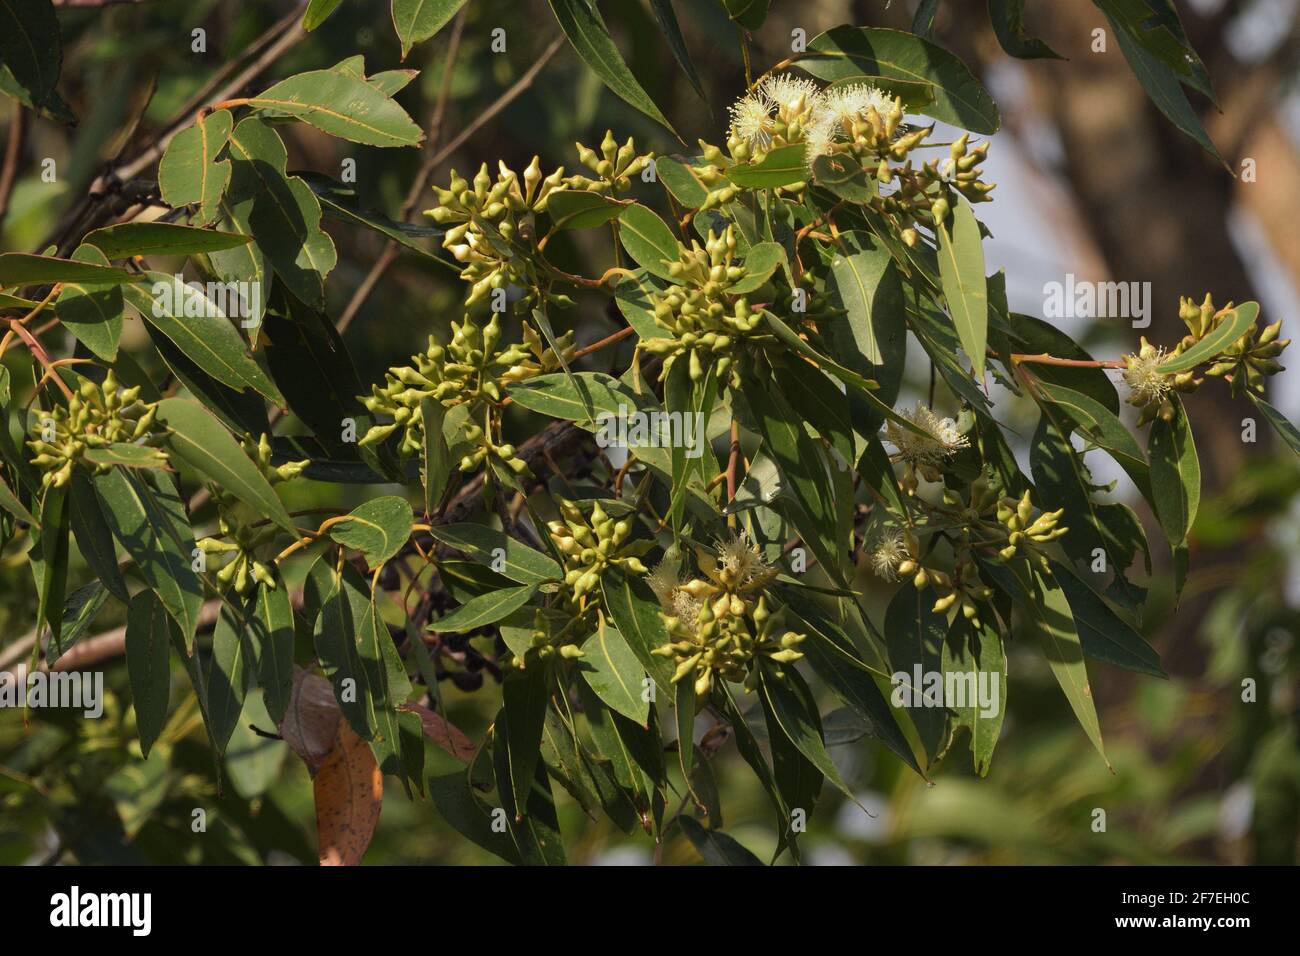 Leaves, flowers and buds of the Swamp Mahogany (Eucalyptus robusta) eucalypt tree in eastern Australia Stock Photo